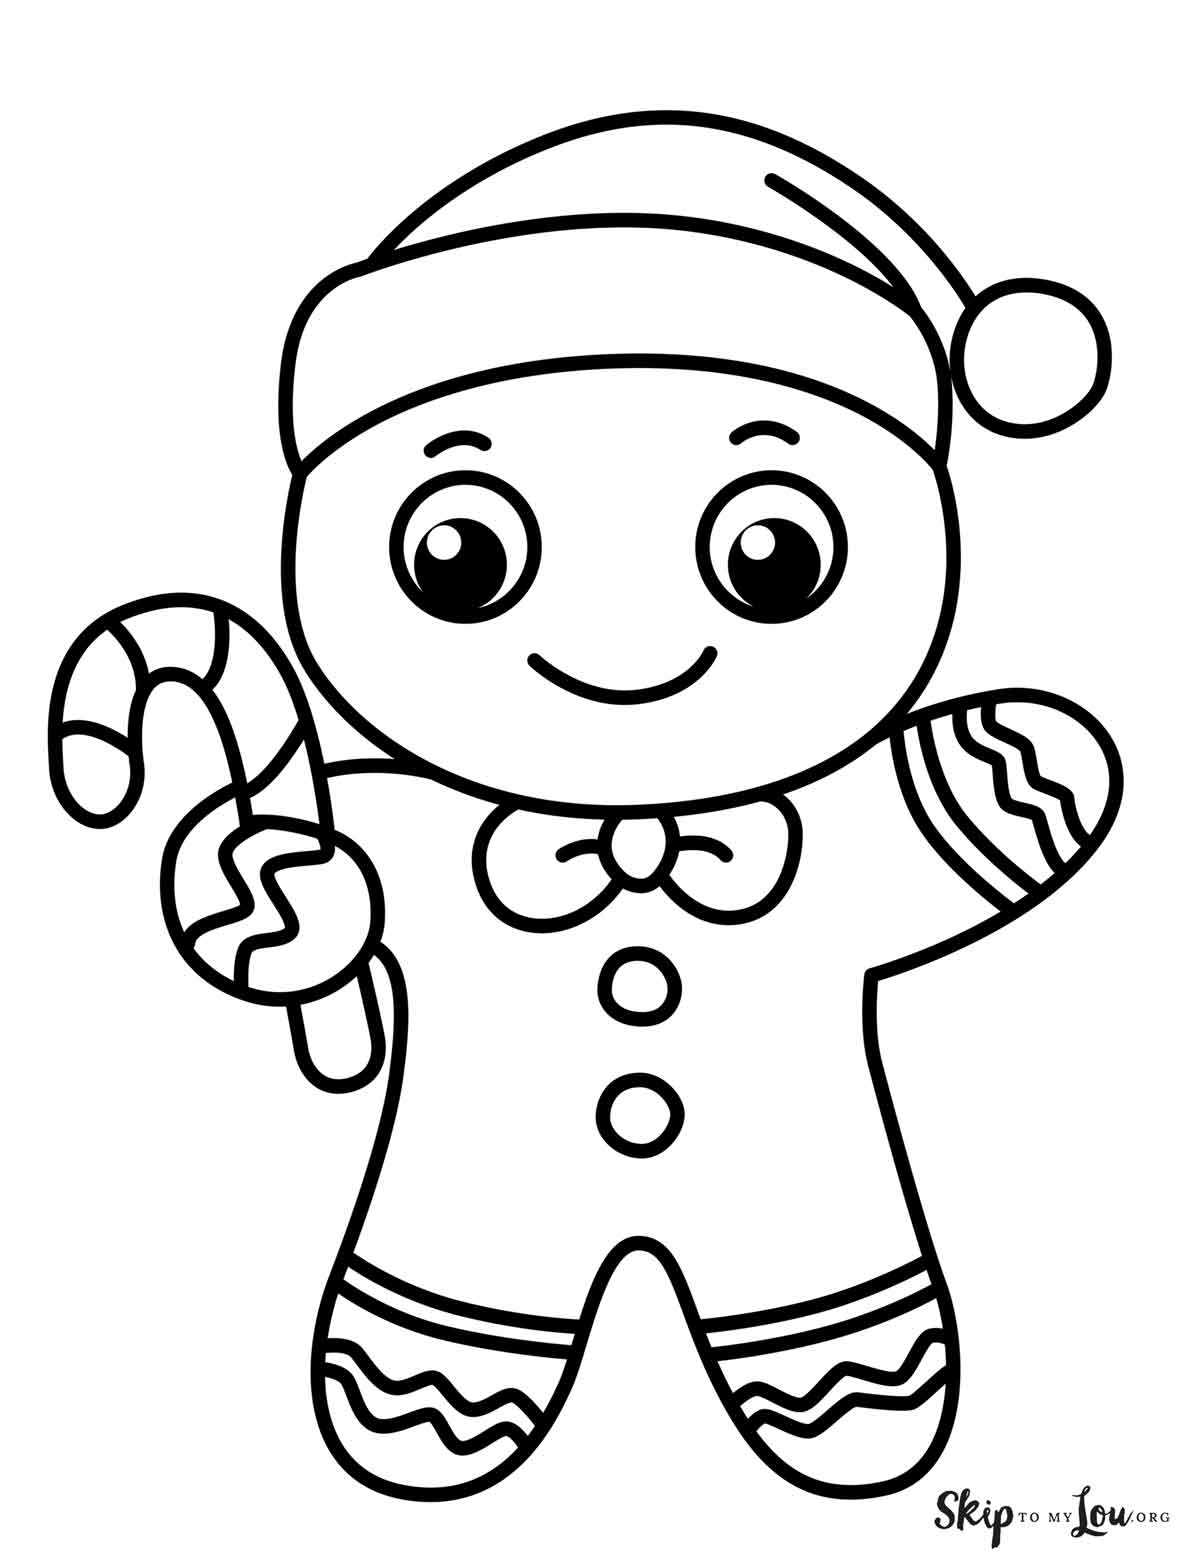 Gingerbread man coloring pages skip to my lou